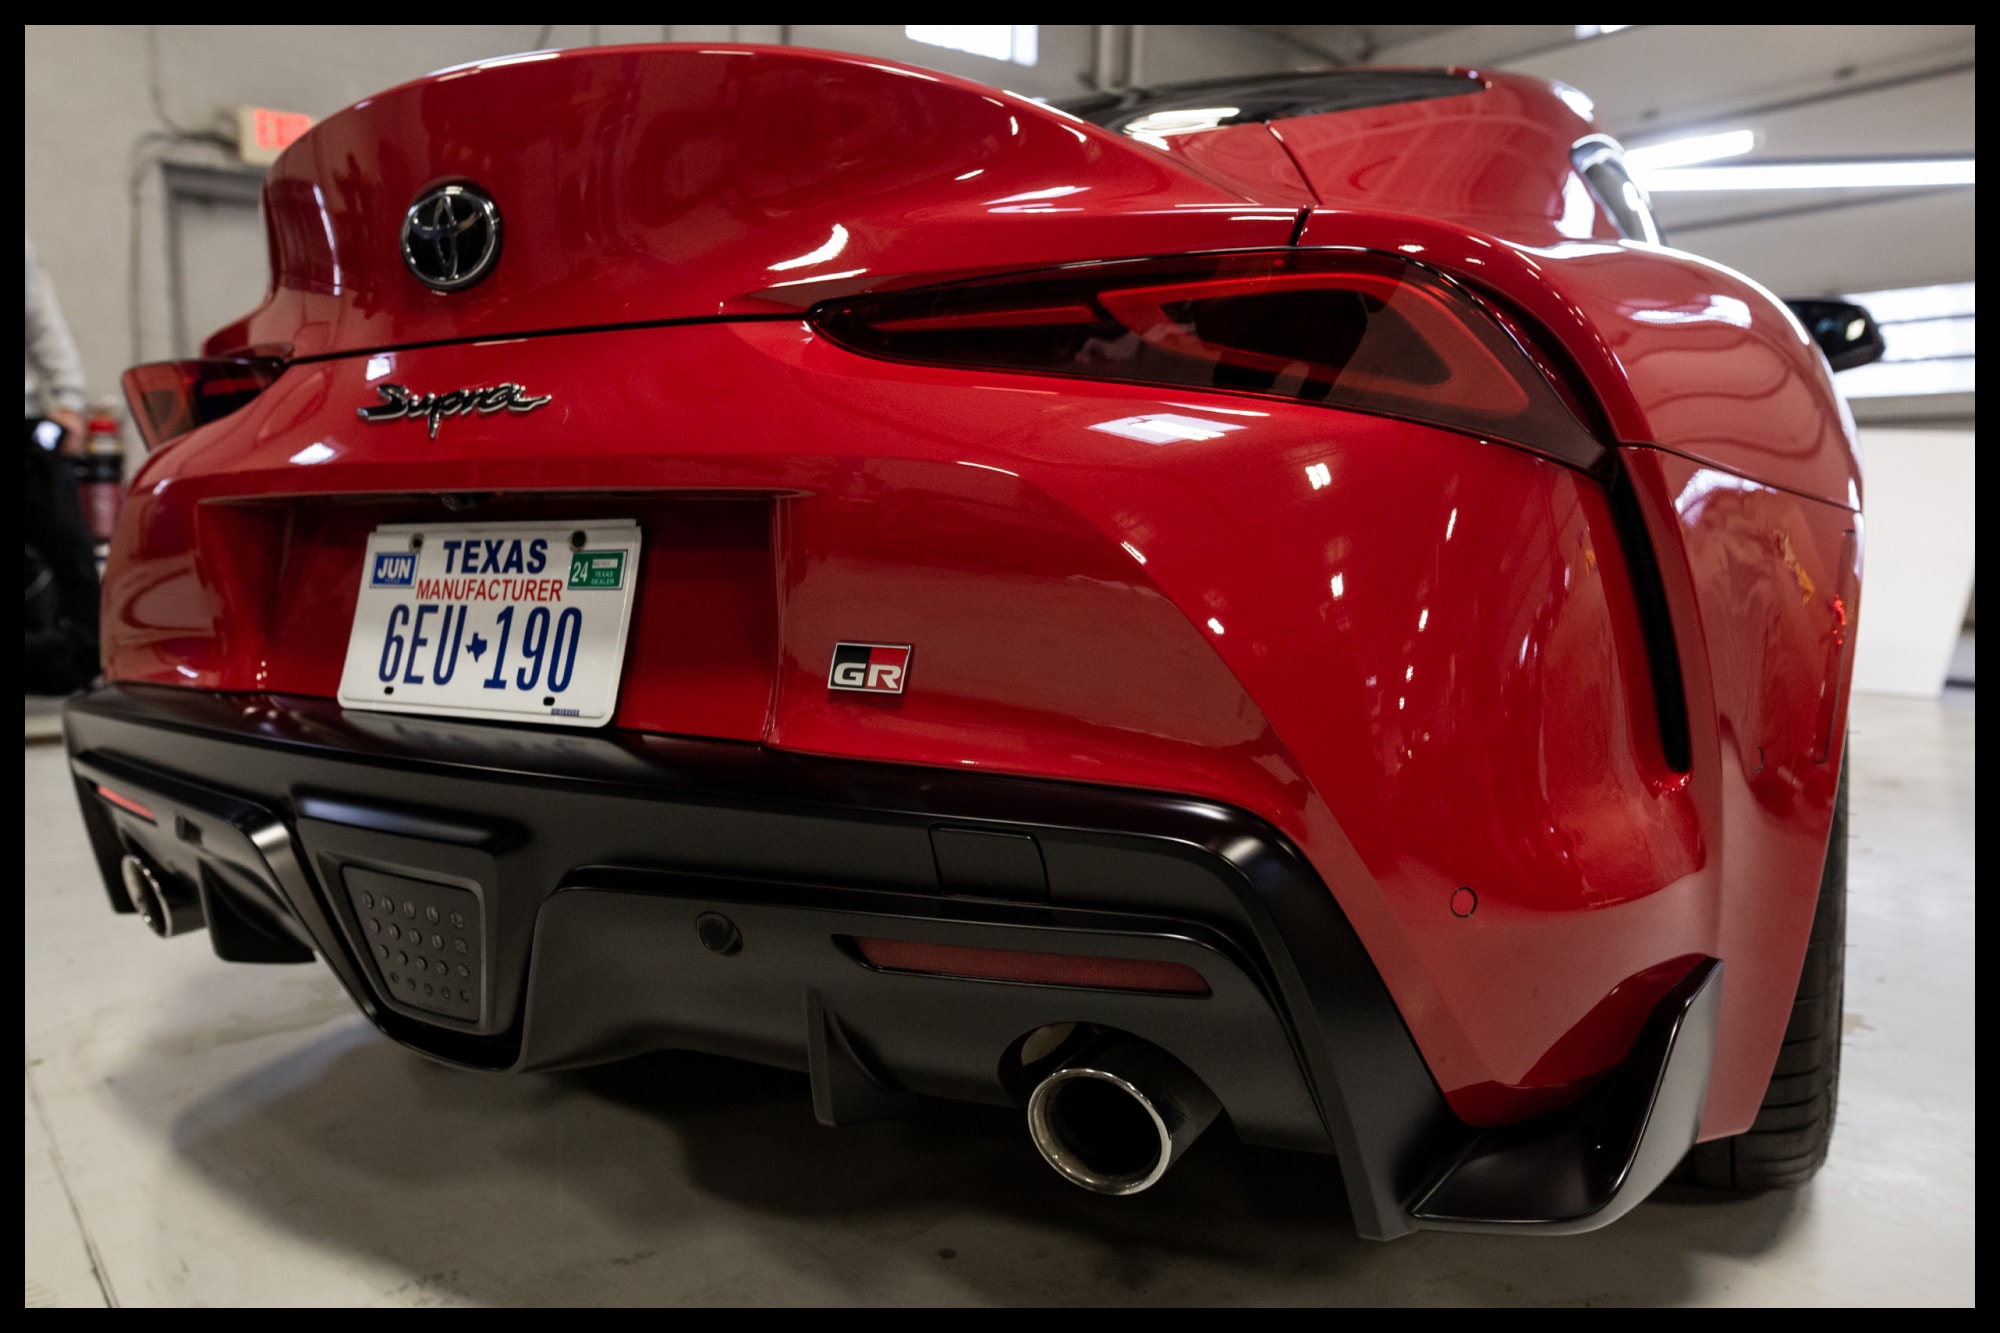 How to Detail a Car With the Toyota GR Supra Christina Roki red step by step wash car show 